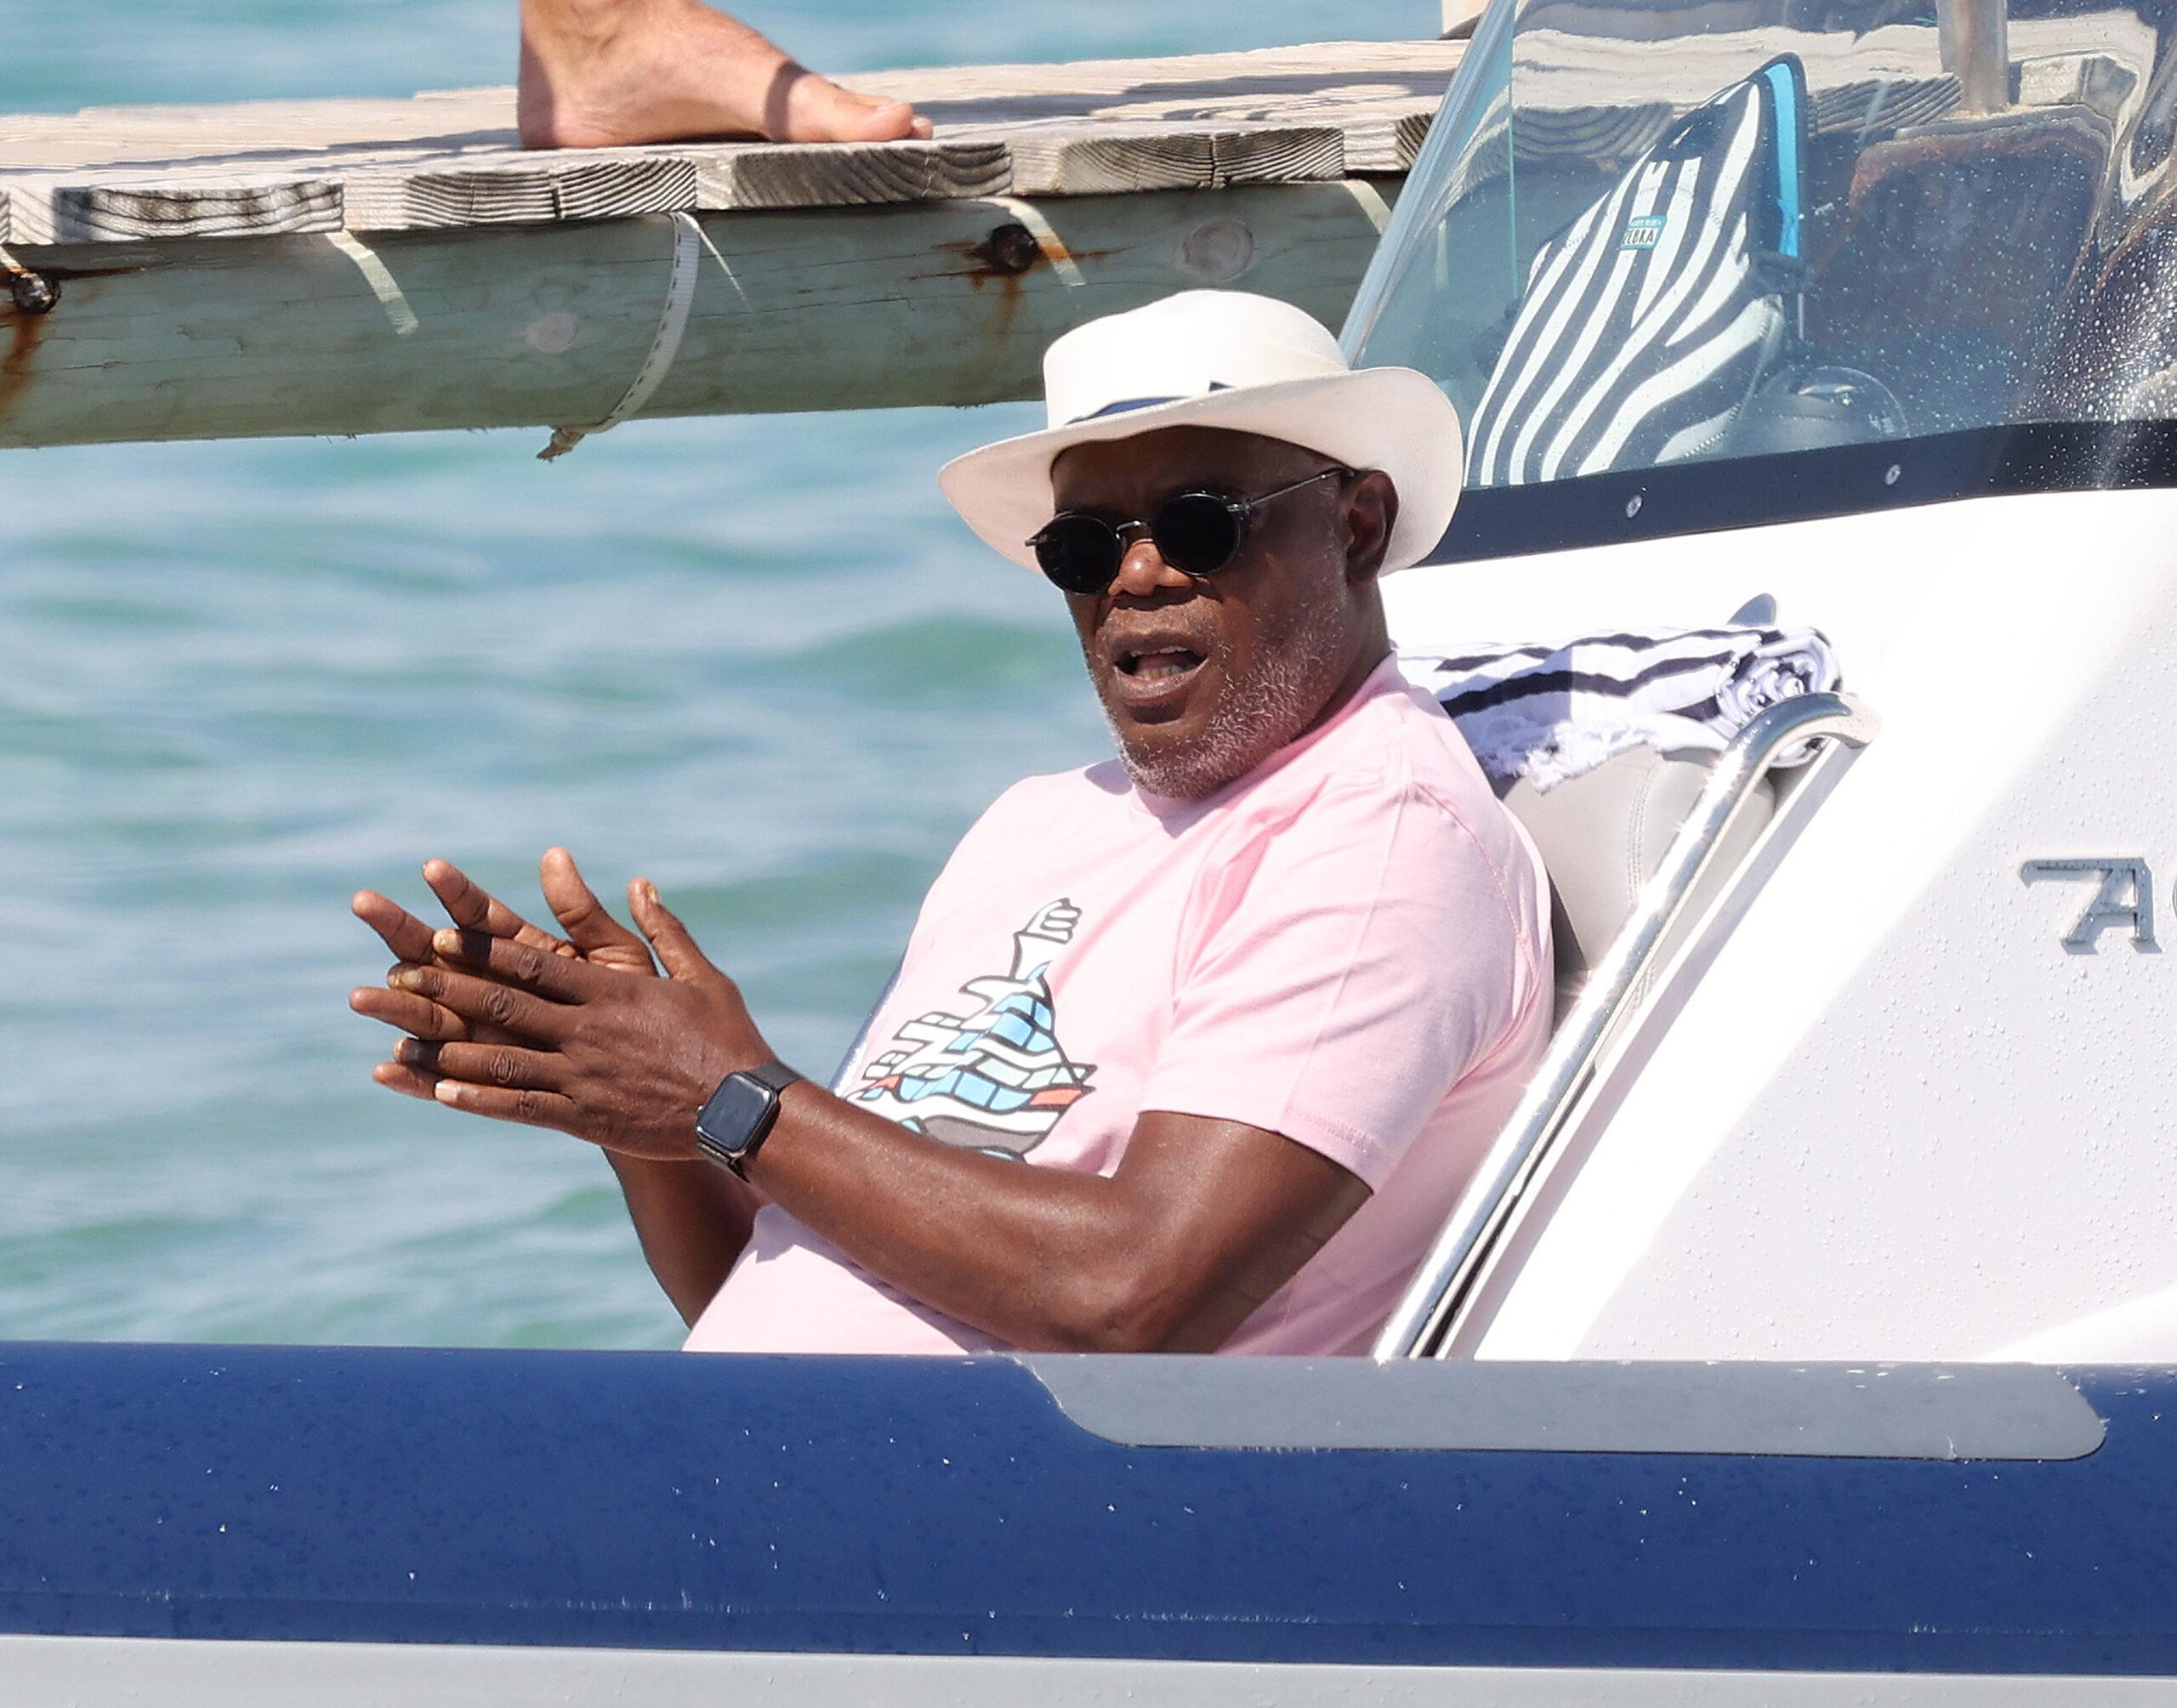 Magic Johnson and Samuel L Jackson at the Club 55 for lunch in St Tropez